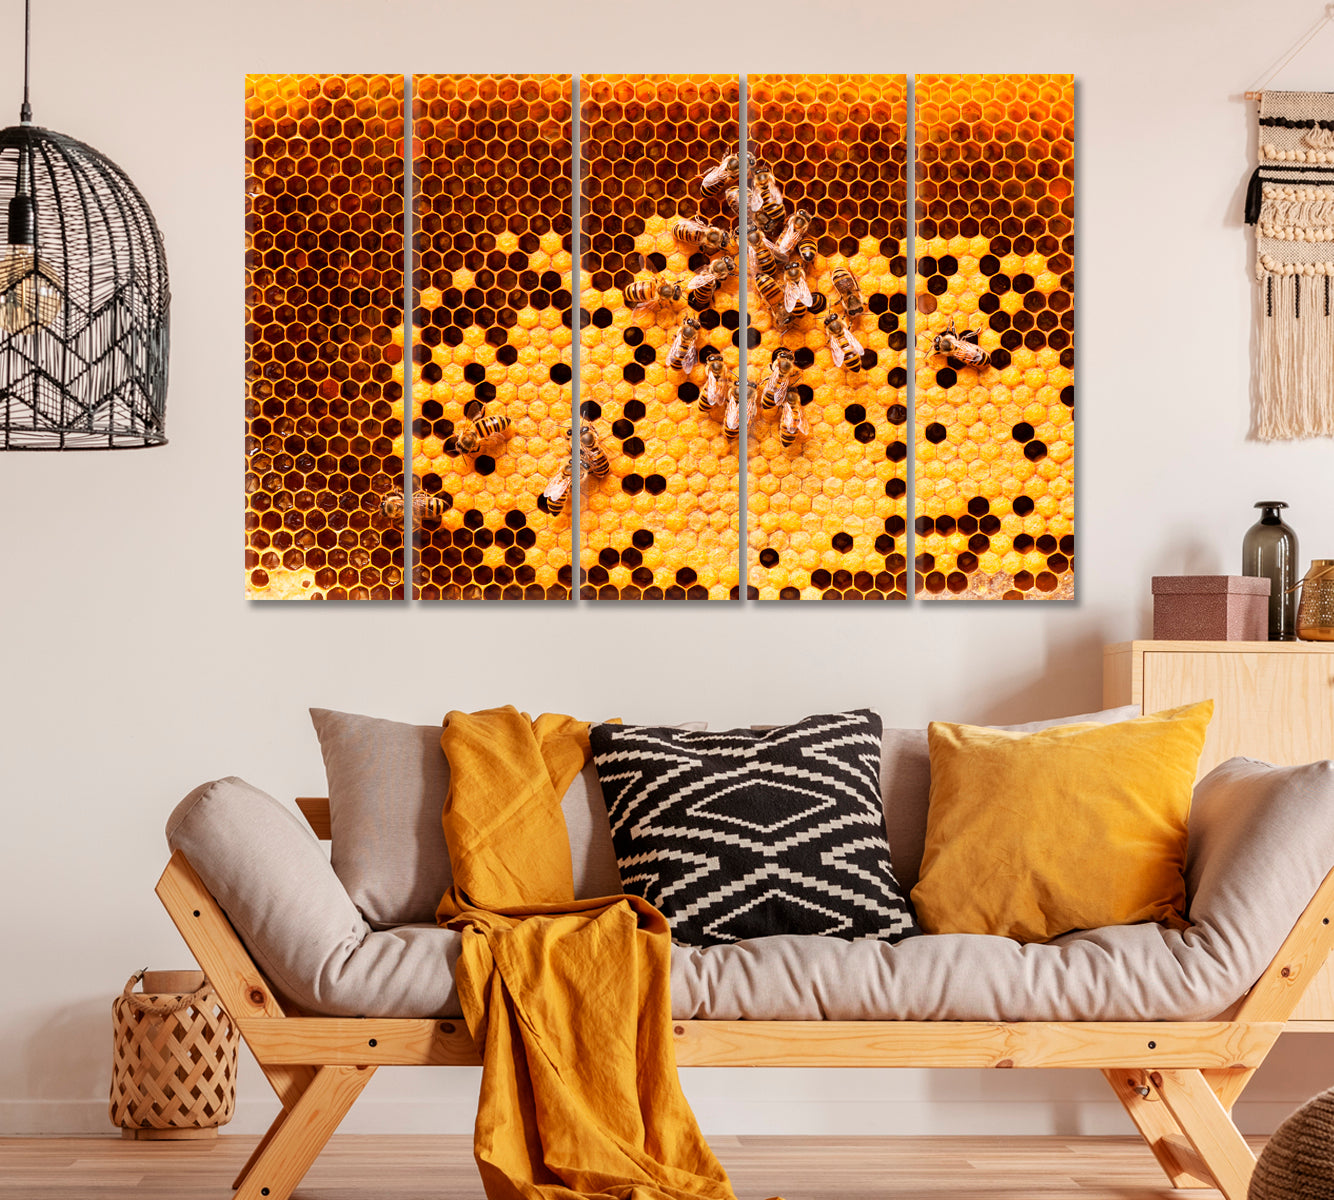 Honey Bees on Honeycomb Canvas Print ArtLexy 5 Panels 36"x24" inches 